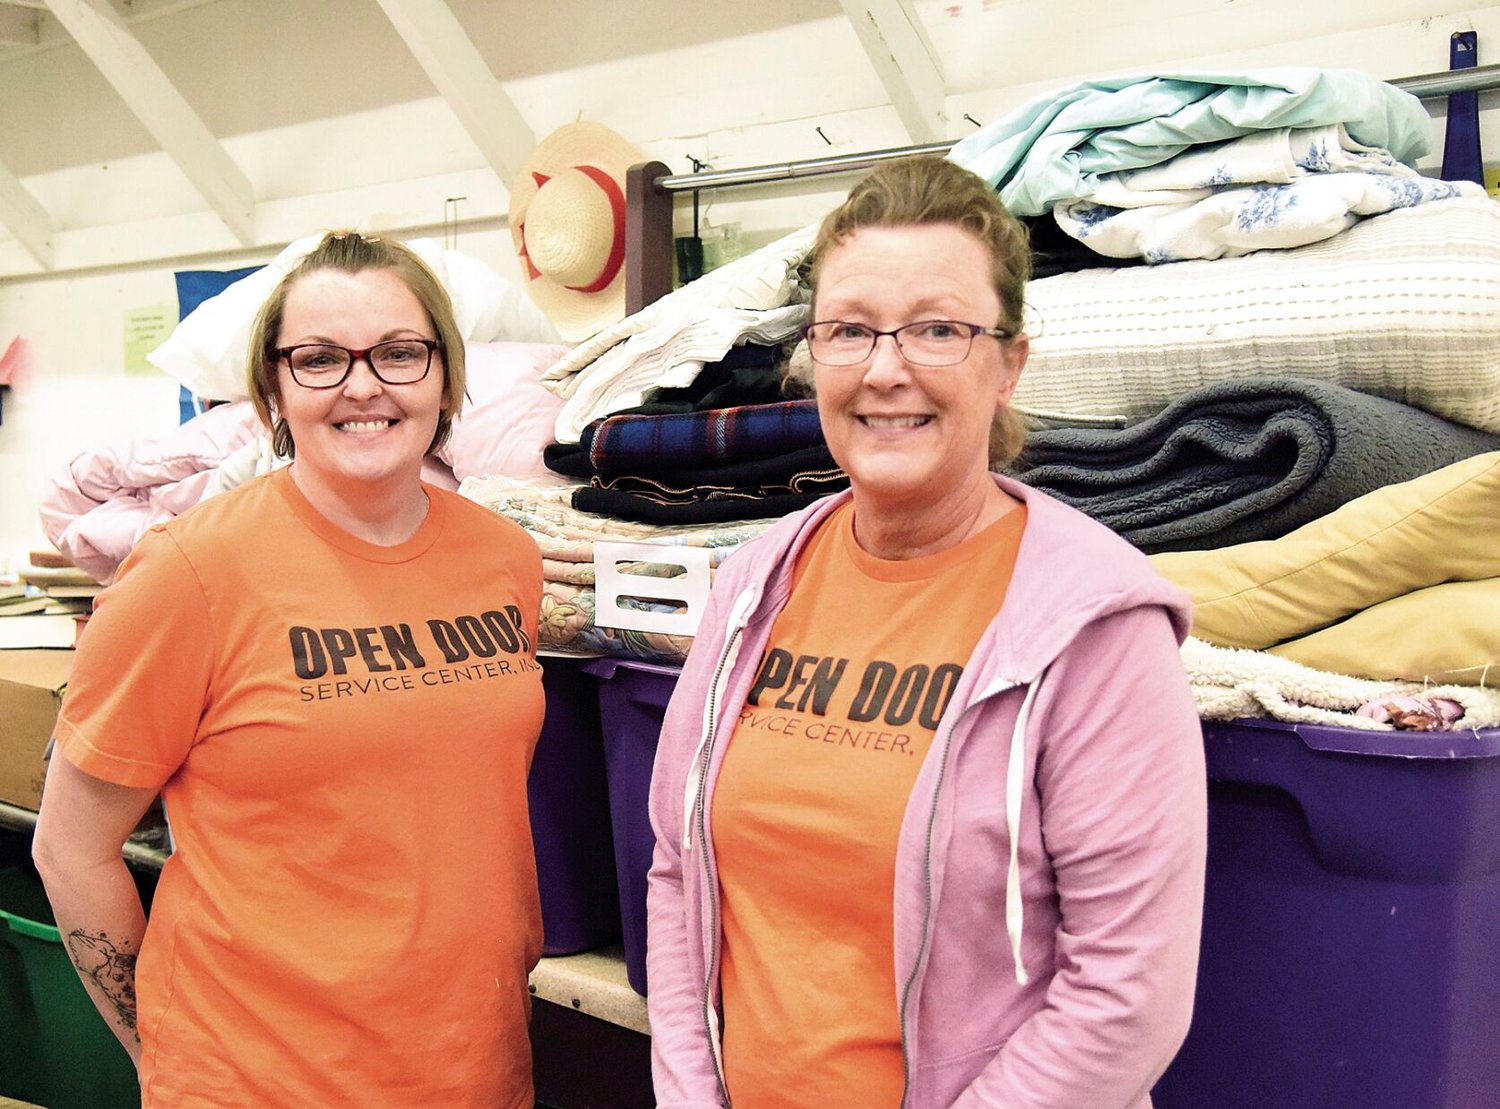 Open Door Thrift Store Manager Mary Spalding, left, and Assistant Manager Jan Patton stand with blankets at the store on Thursday, March 2. The pair noted they need donations of blankets to send to earthquake victims in Turkey.